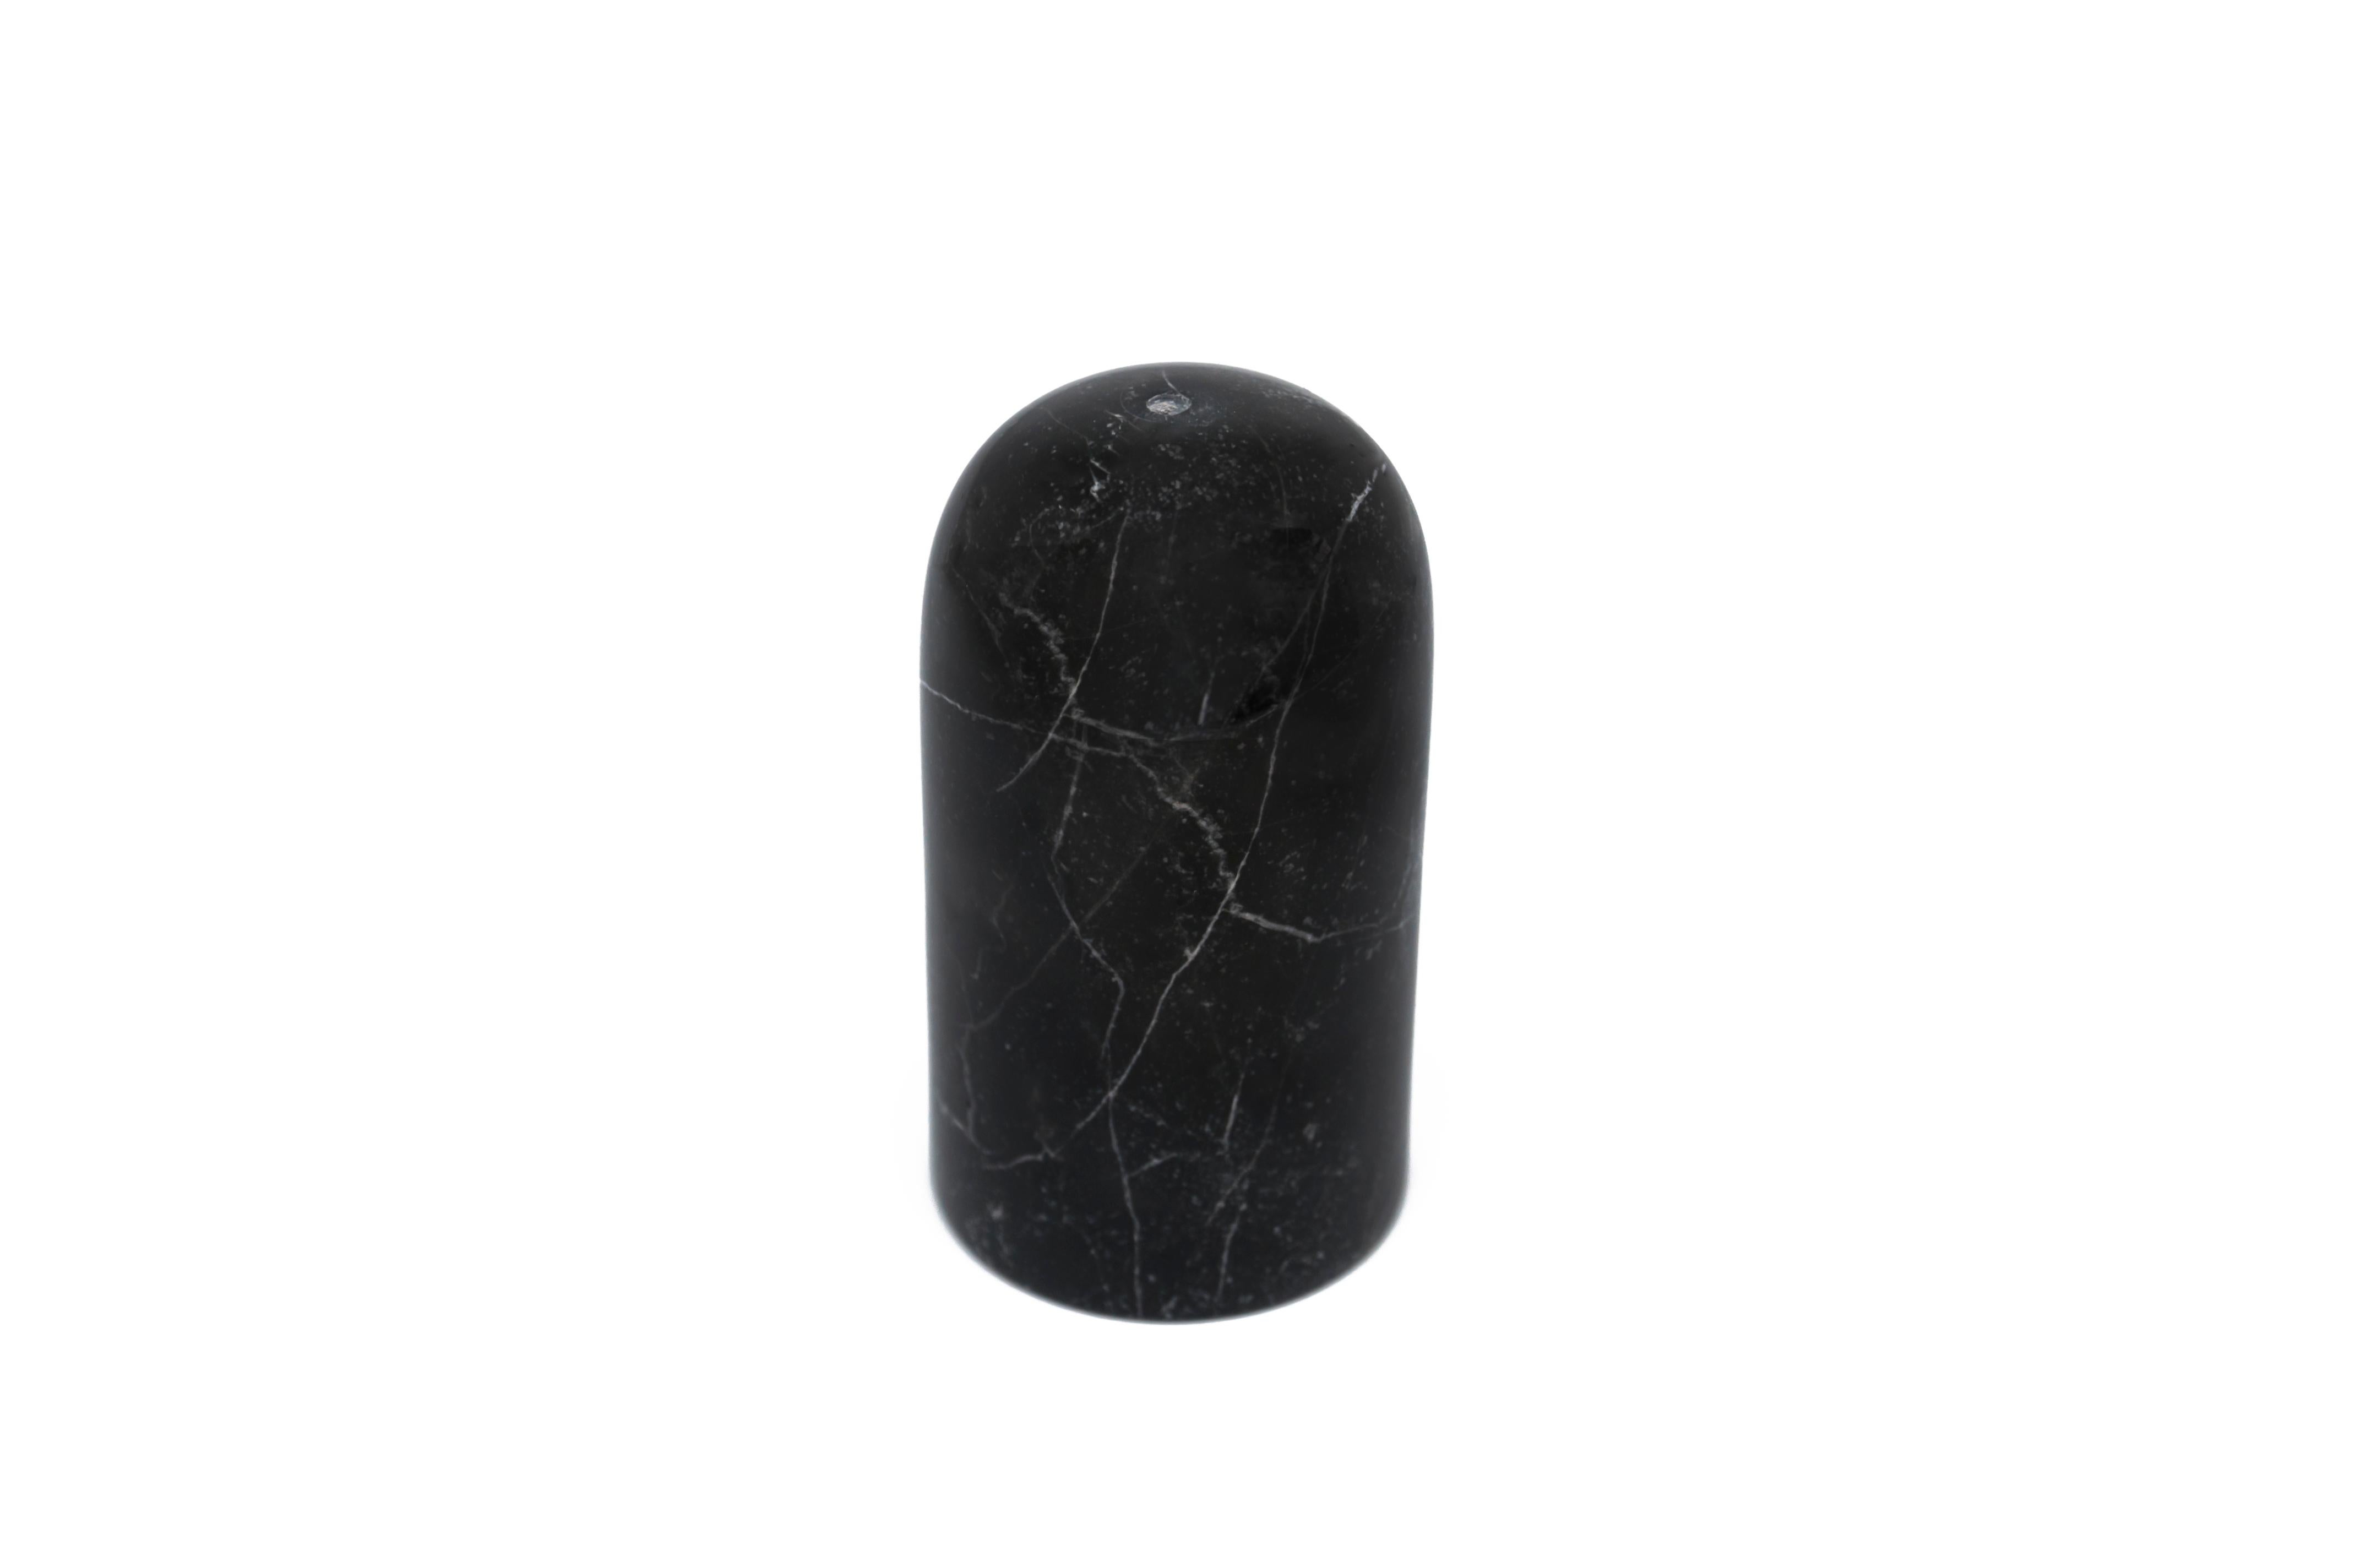 Black and white rounded shape salt and pepper set.
Each piece is in a way unique (since each marble block is different in veins and shades) and handcrafted in Italy. Slight variations in shape, color and size are to be considered a guarantee of a